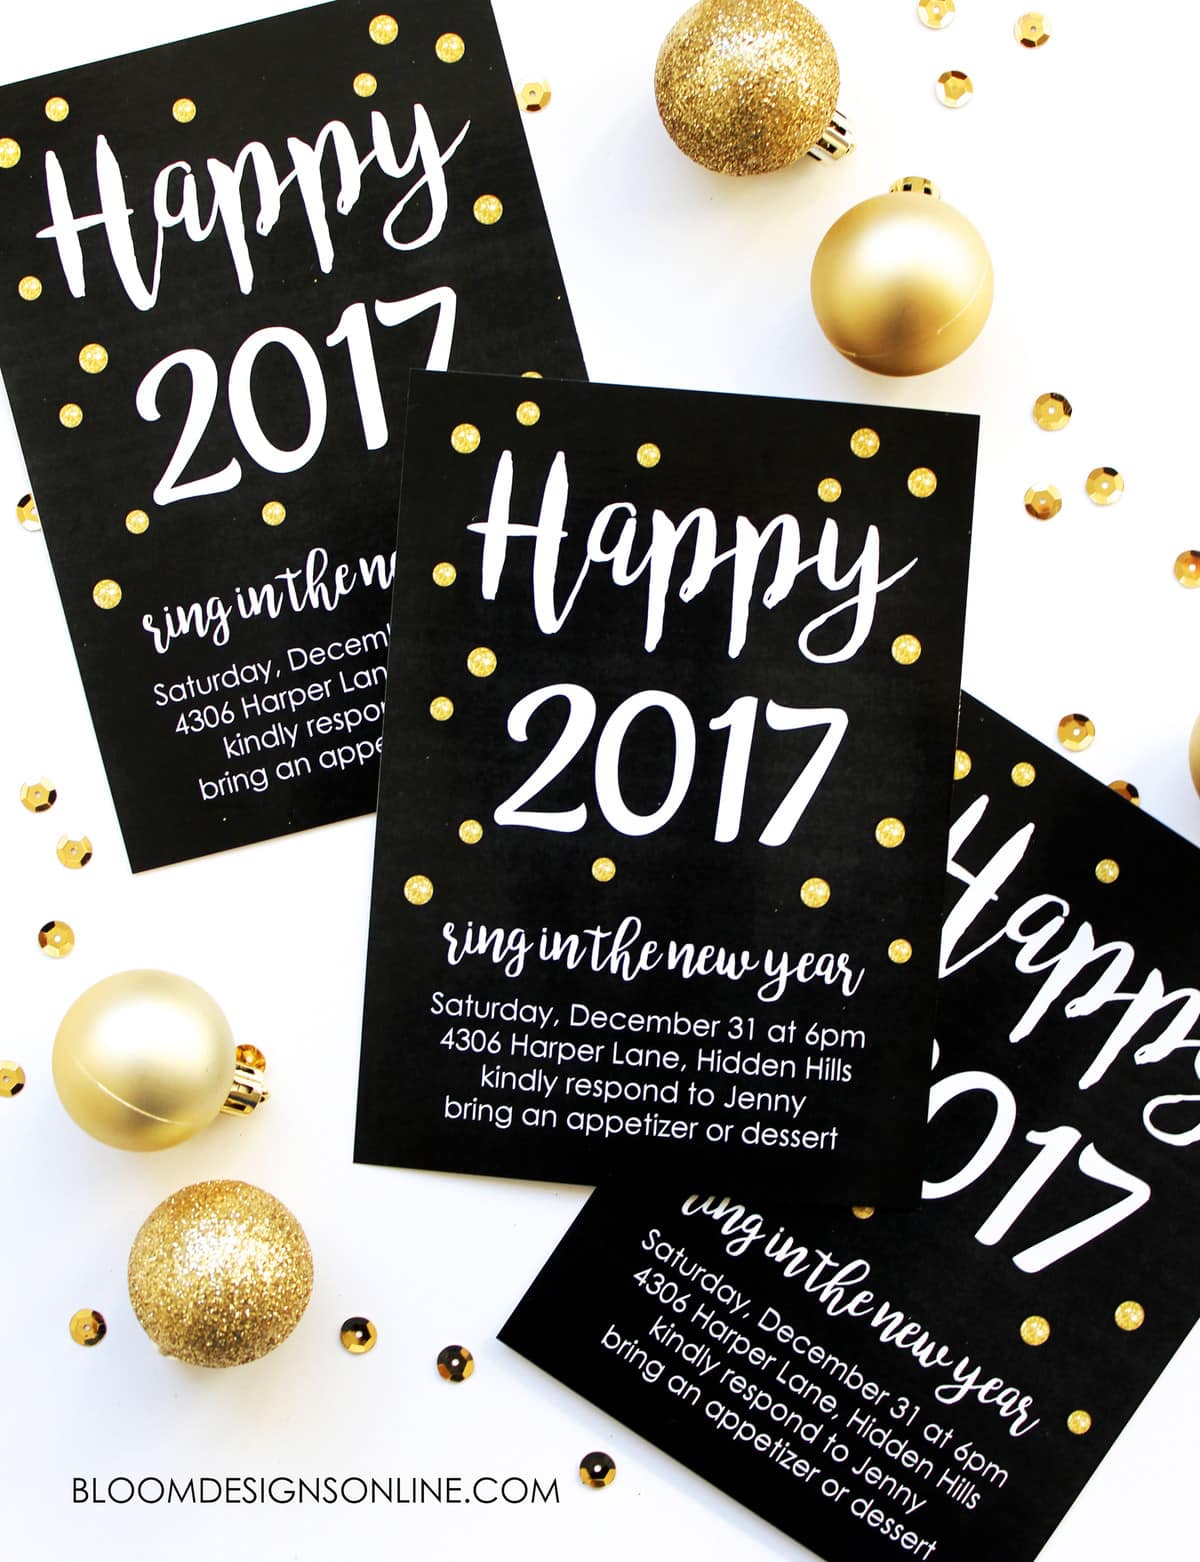 A great party starts with a great invitation! Set the mood for YOUR New Years party by downloading the file and inserting YOUR party info in the printable. That's right - it's editable!!